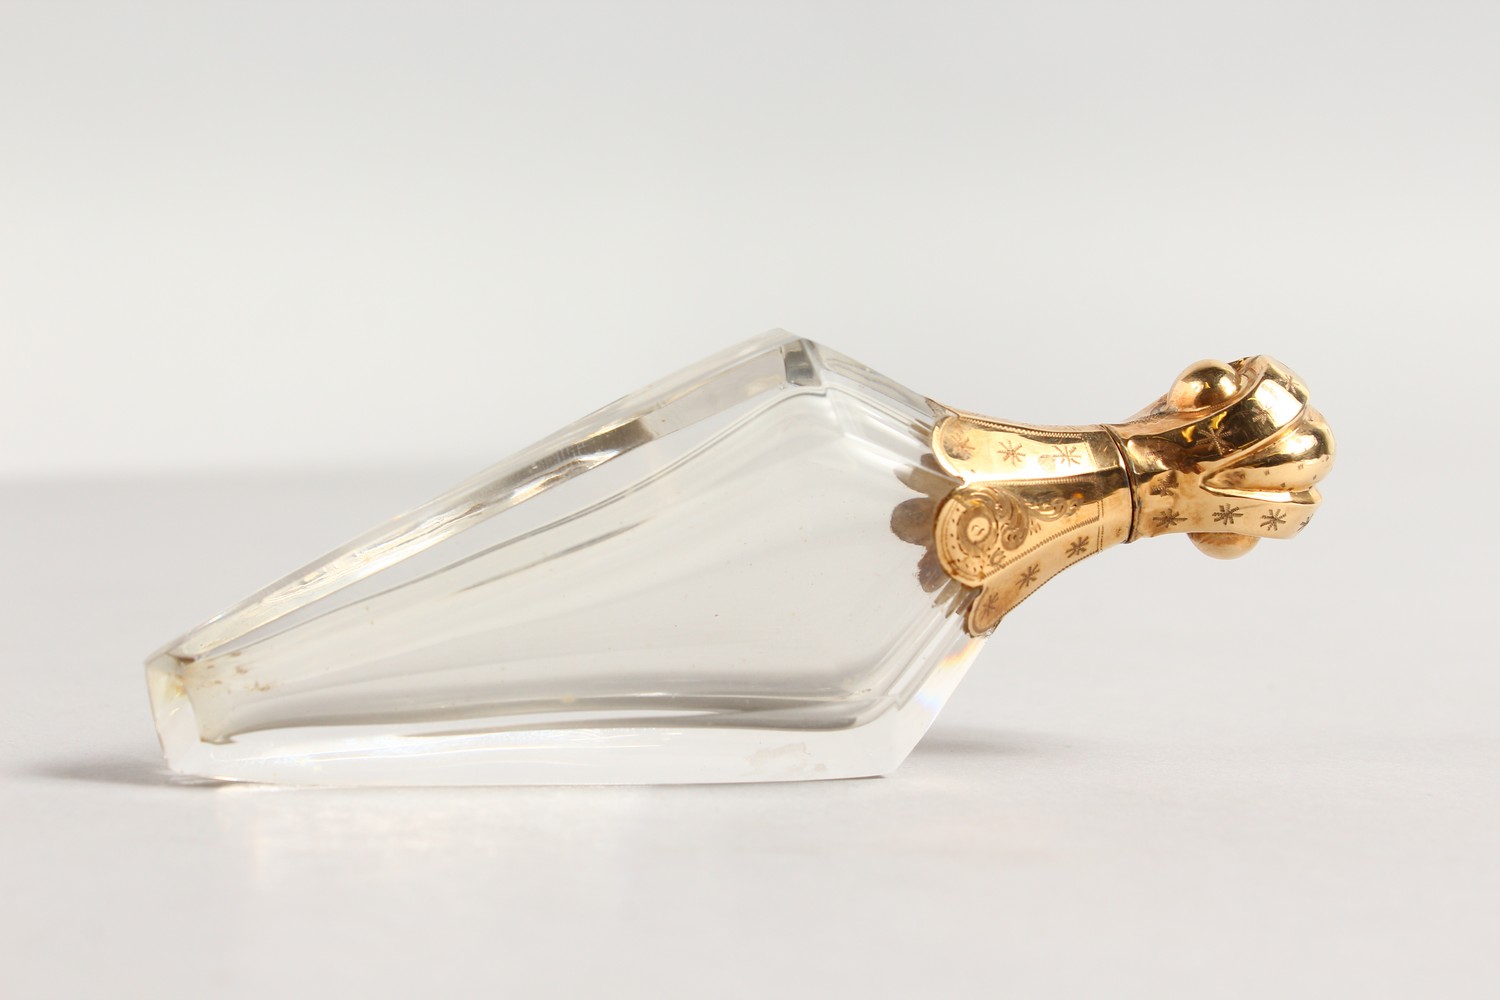 A GEORGIAN GLASS SCENT BOTTLE with gold top. - Image 4 of 6